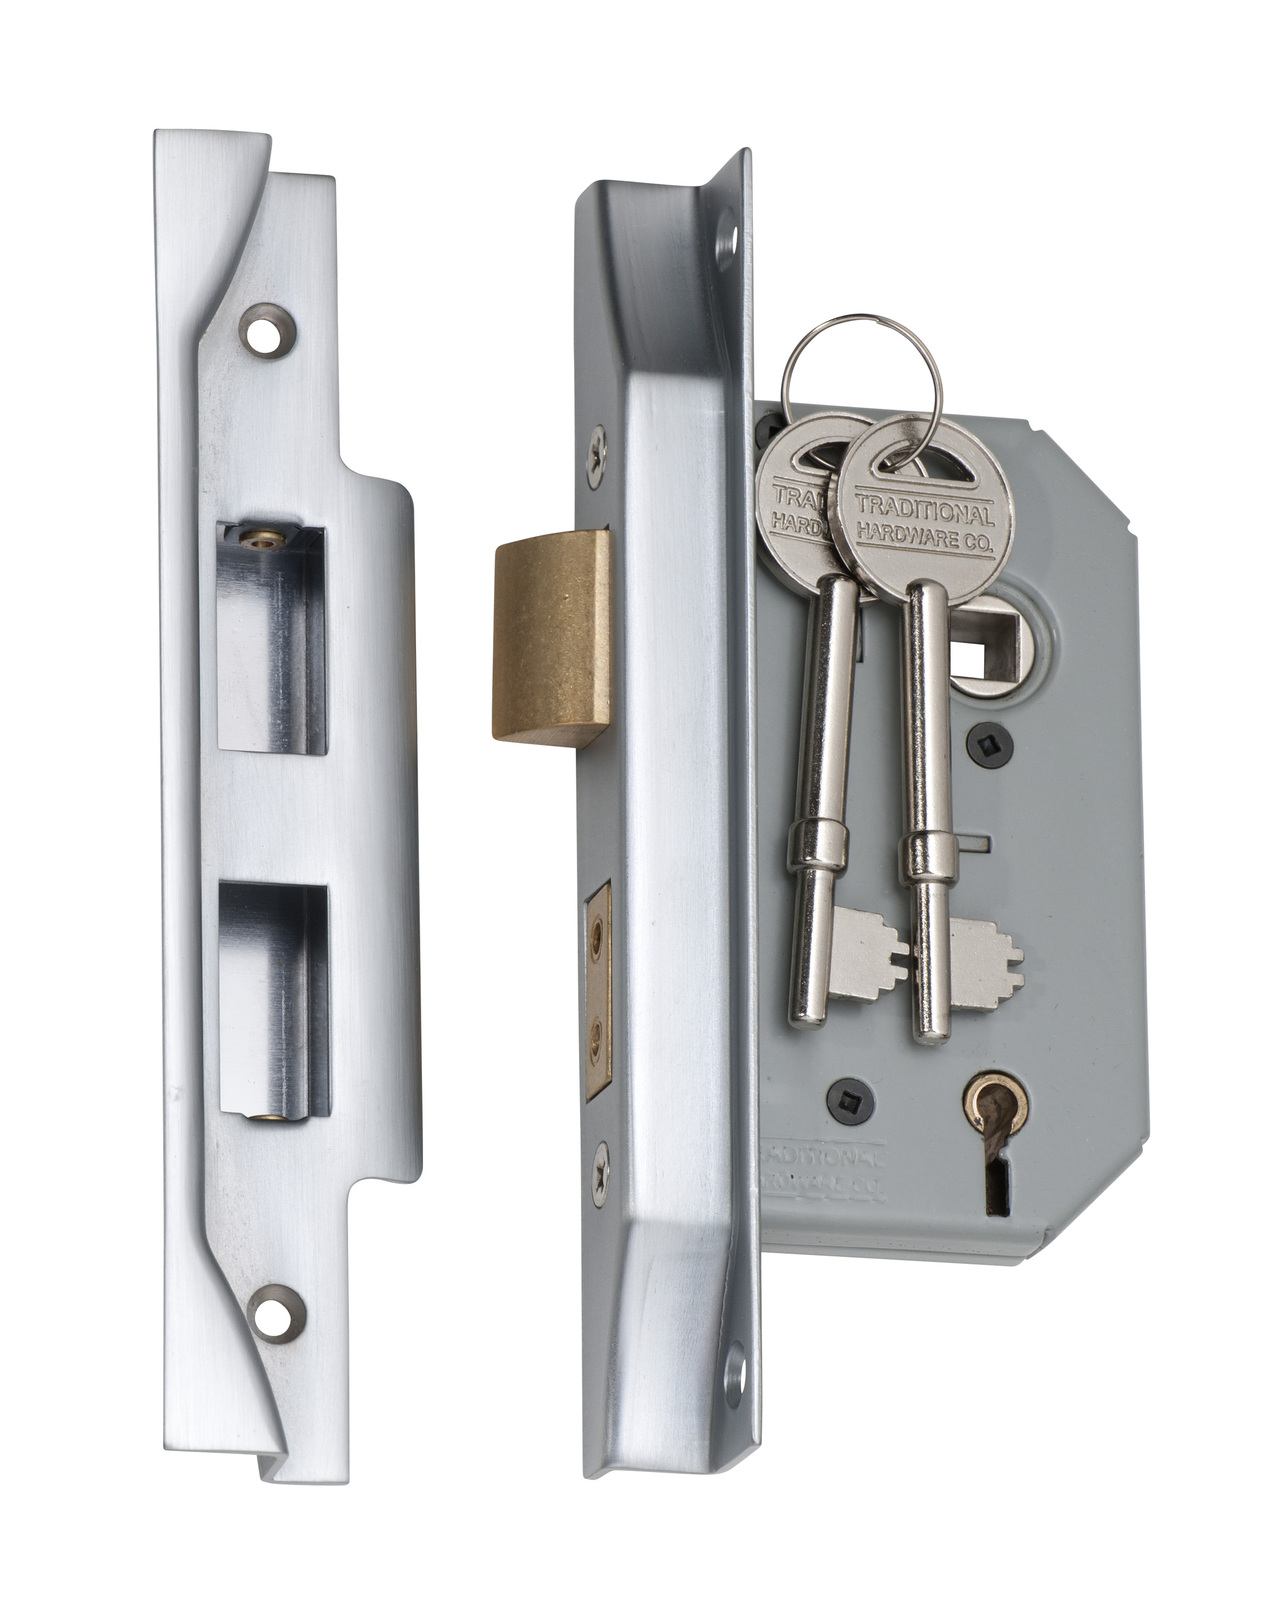 rebated-euro-style-mortice-lock-lock-and-handle